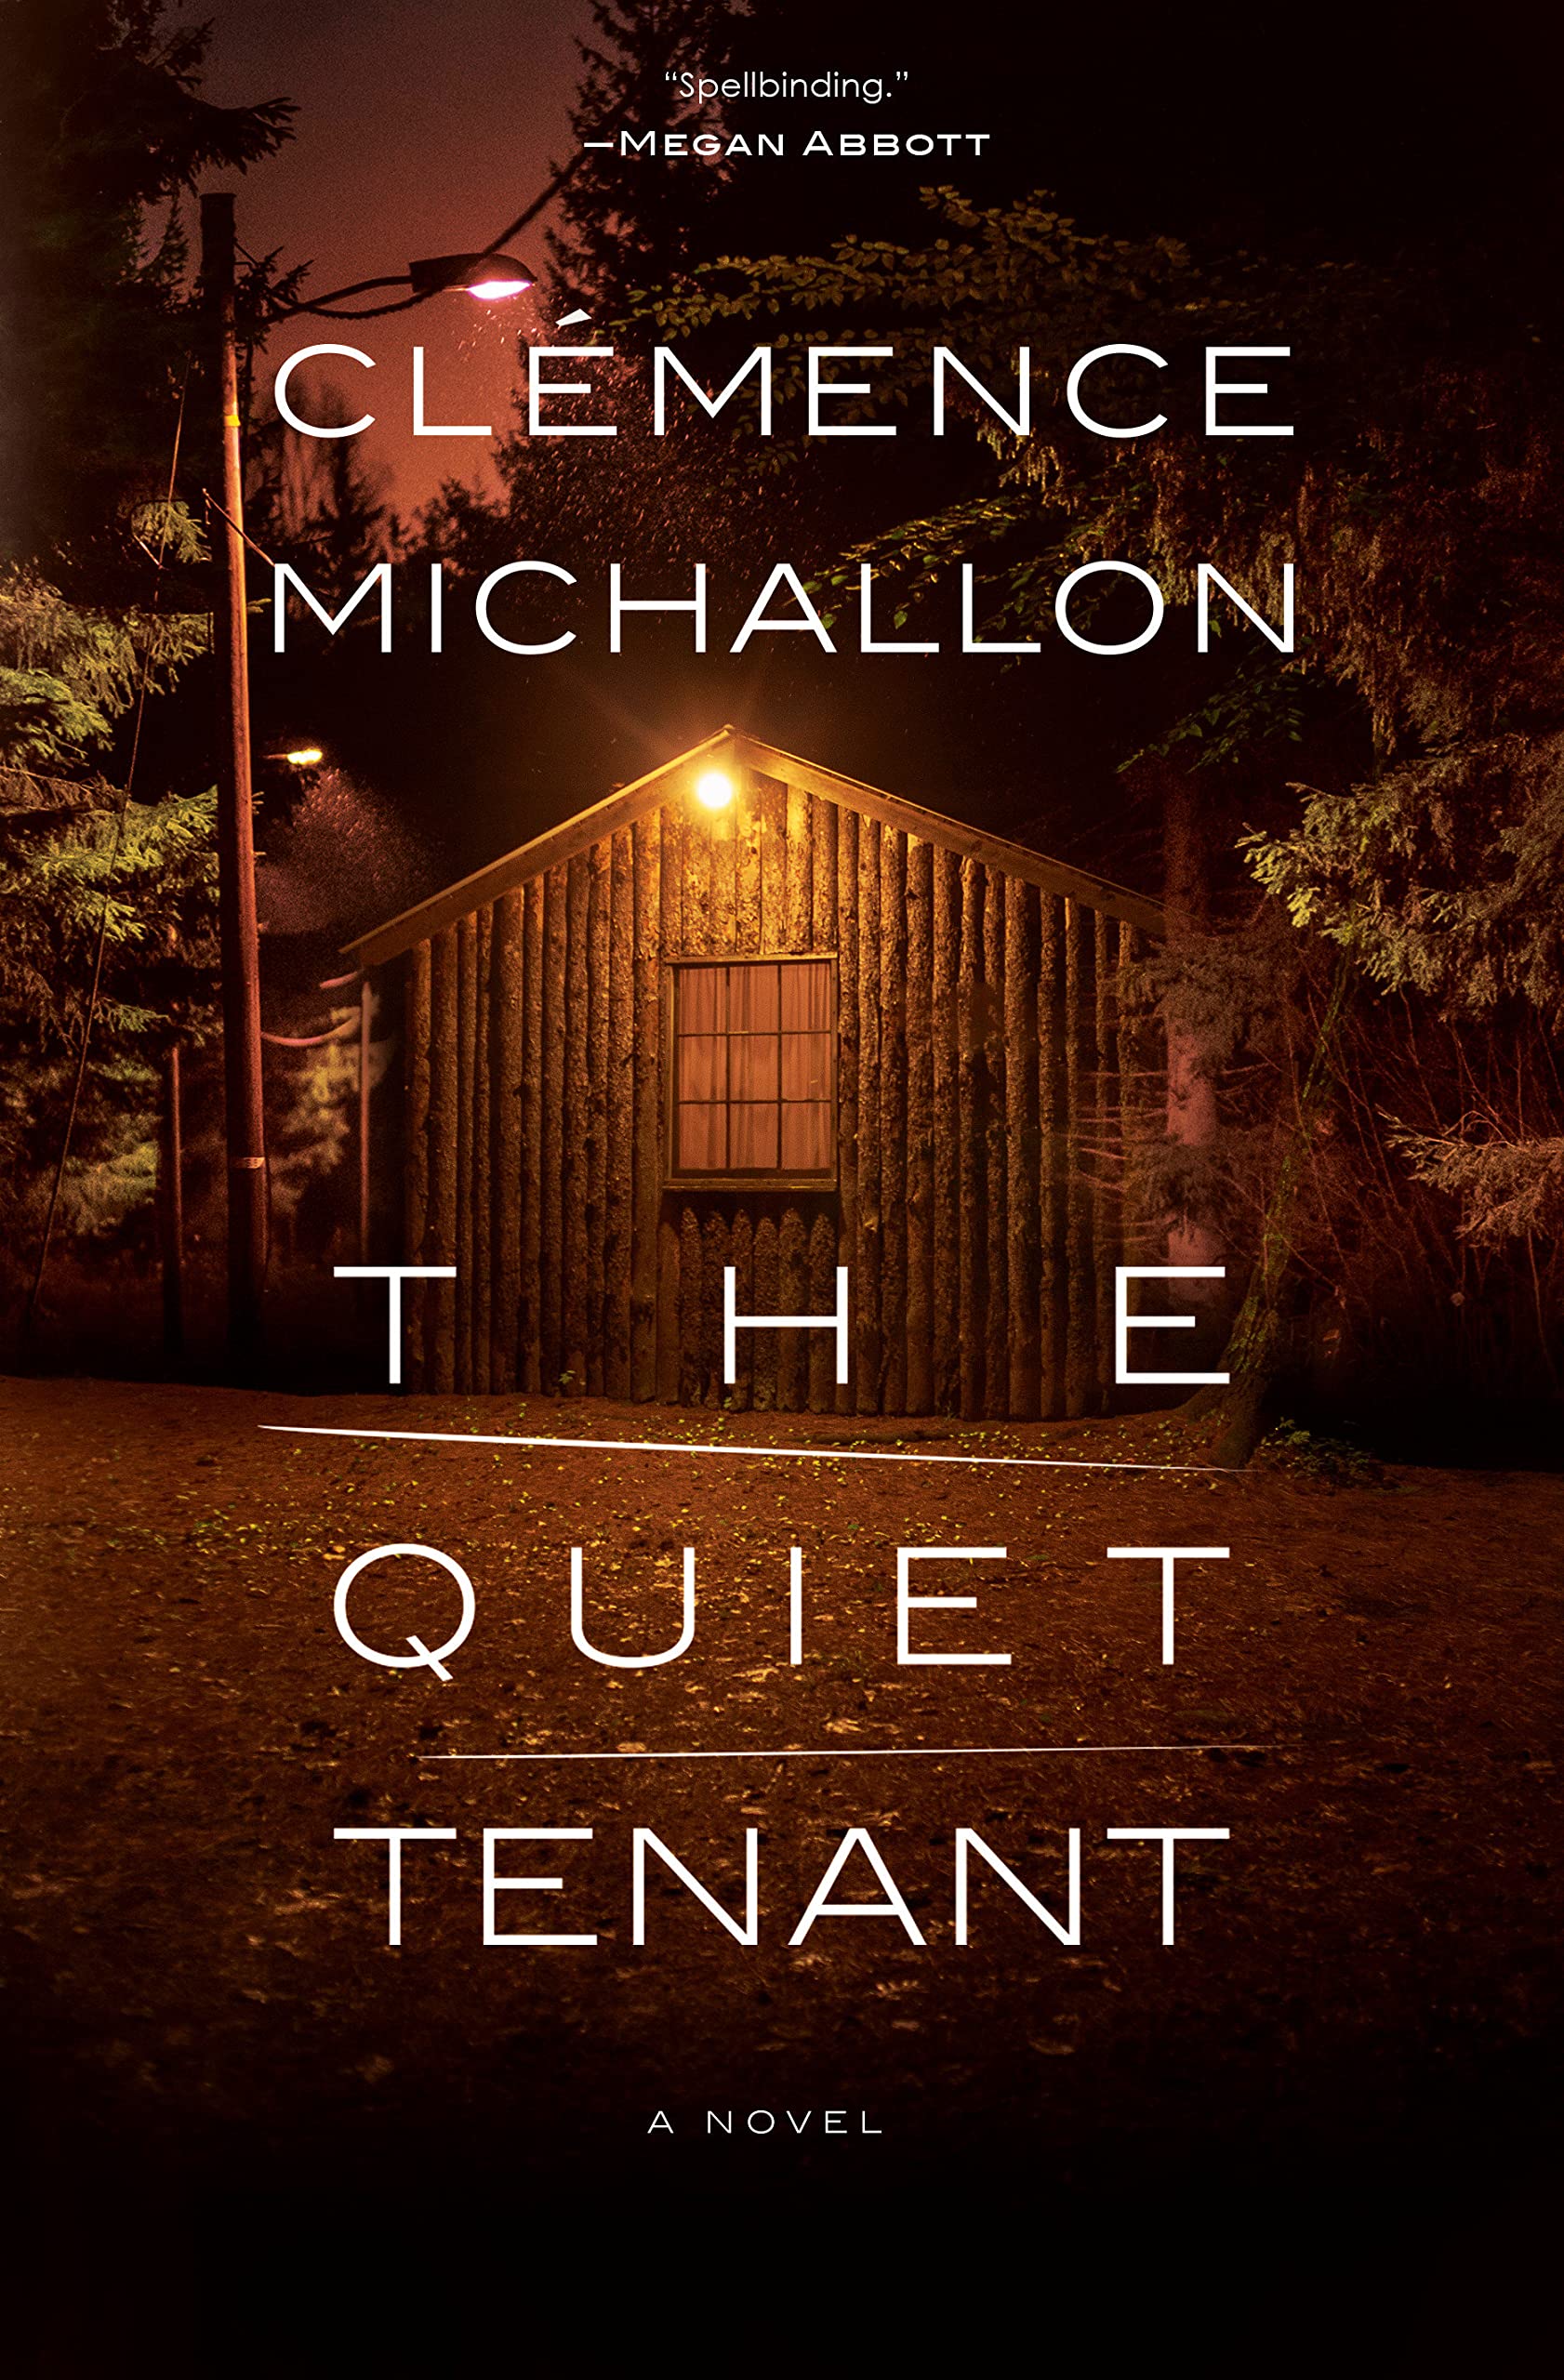 Image for "The Quiet Tenant"